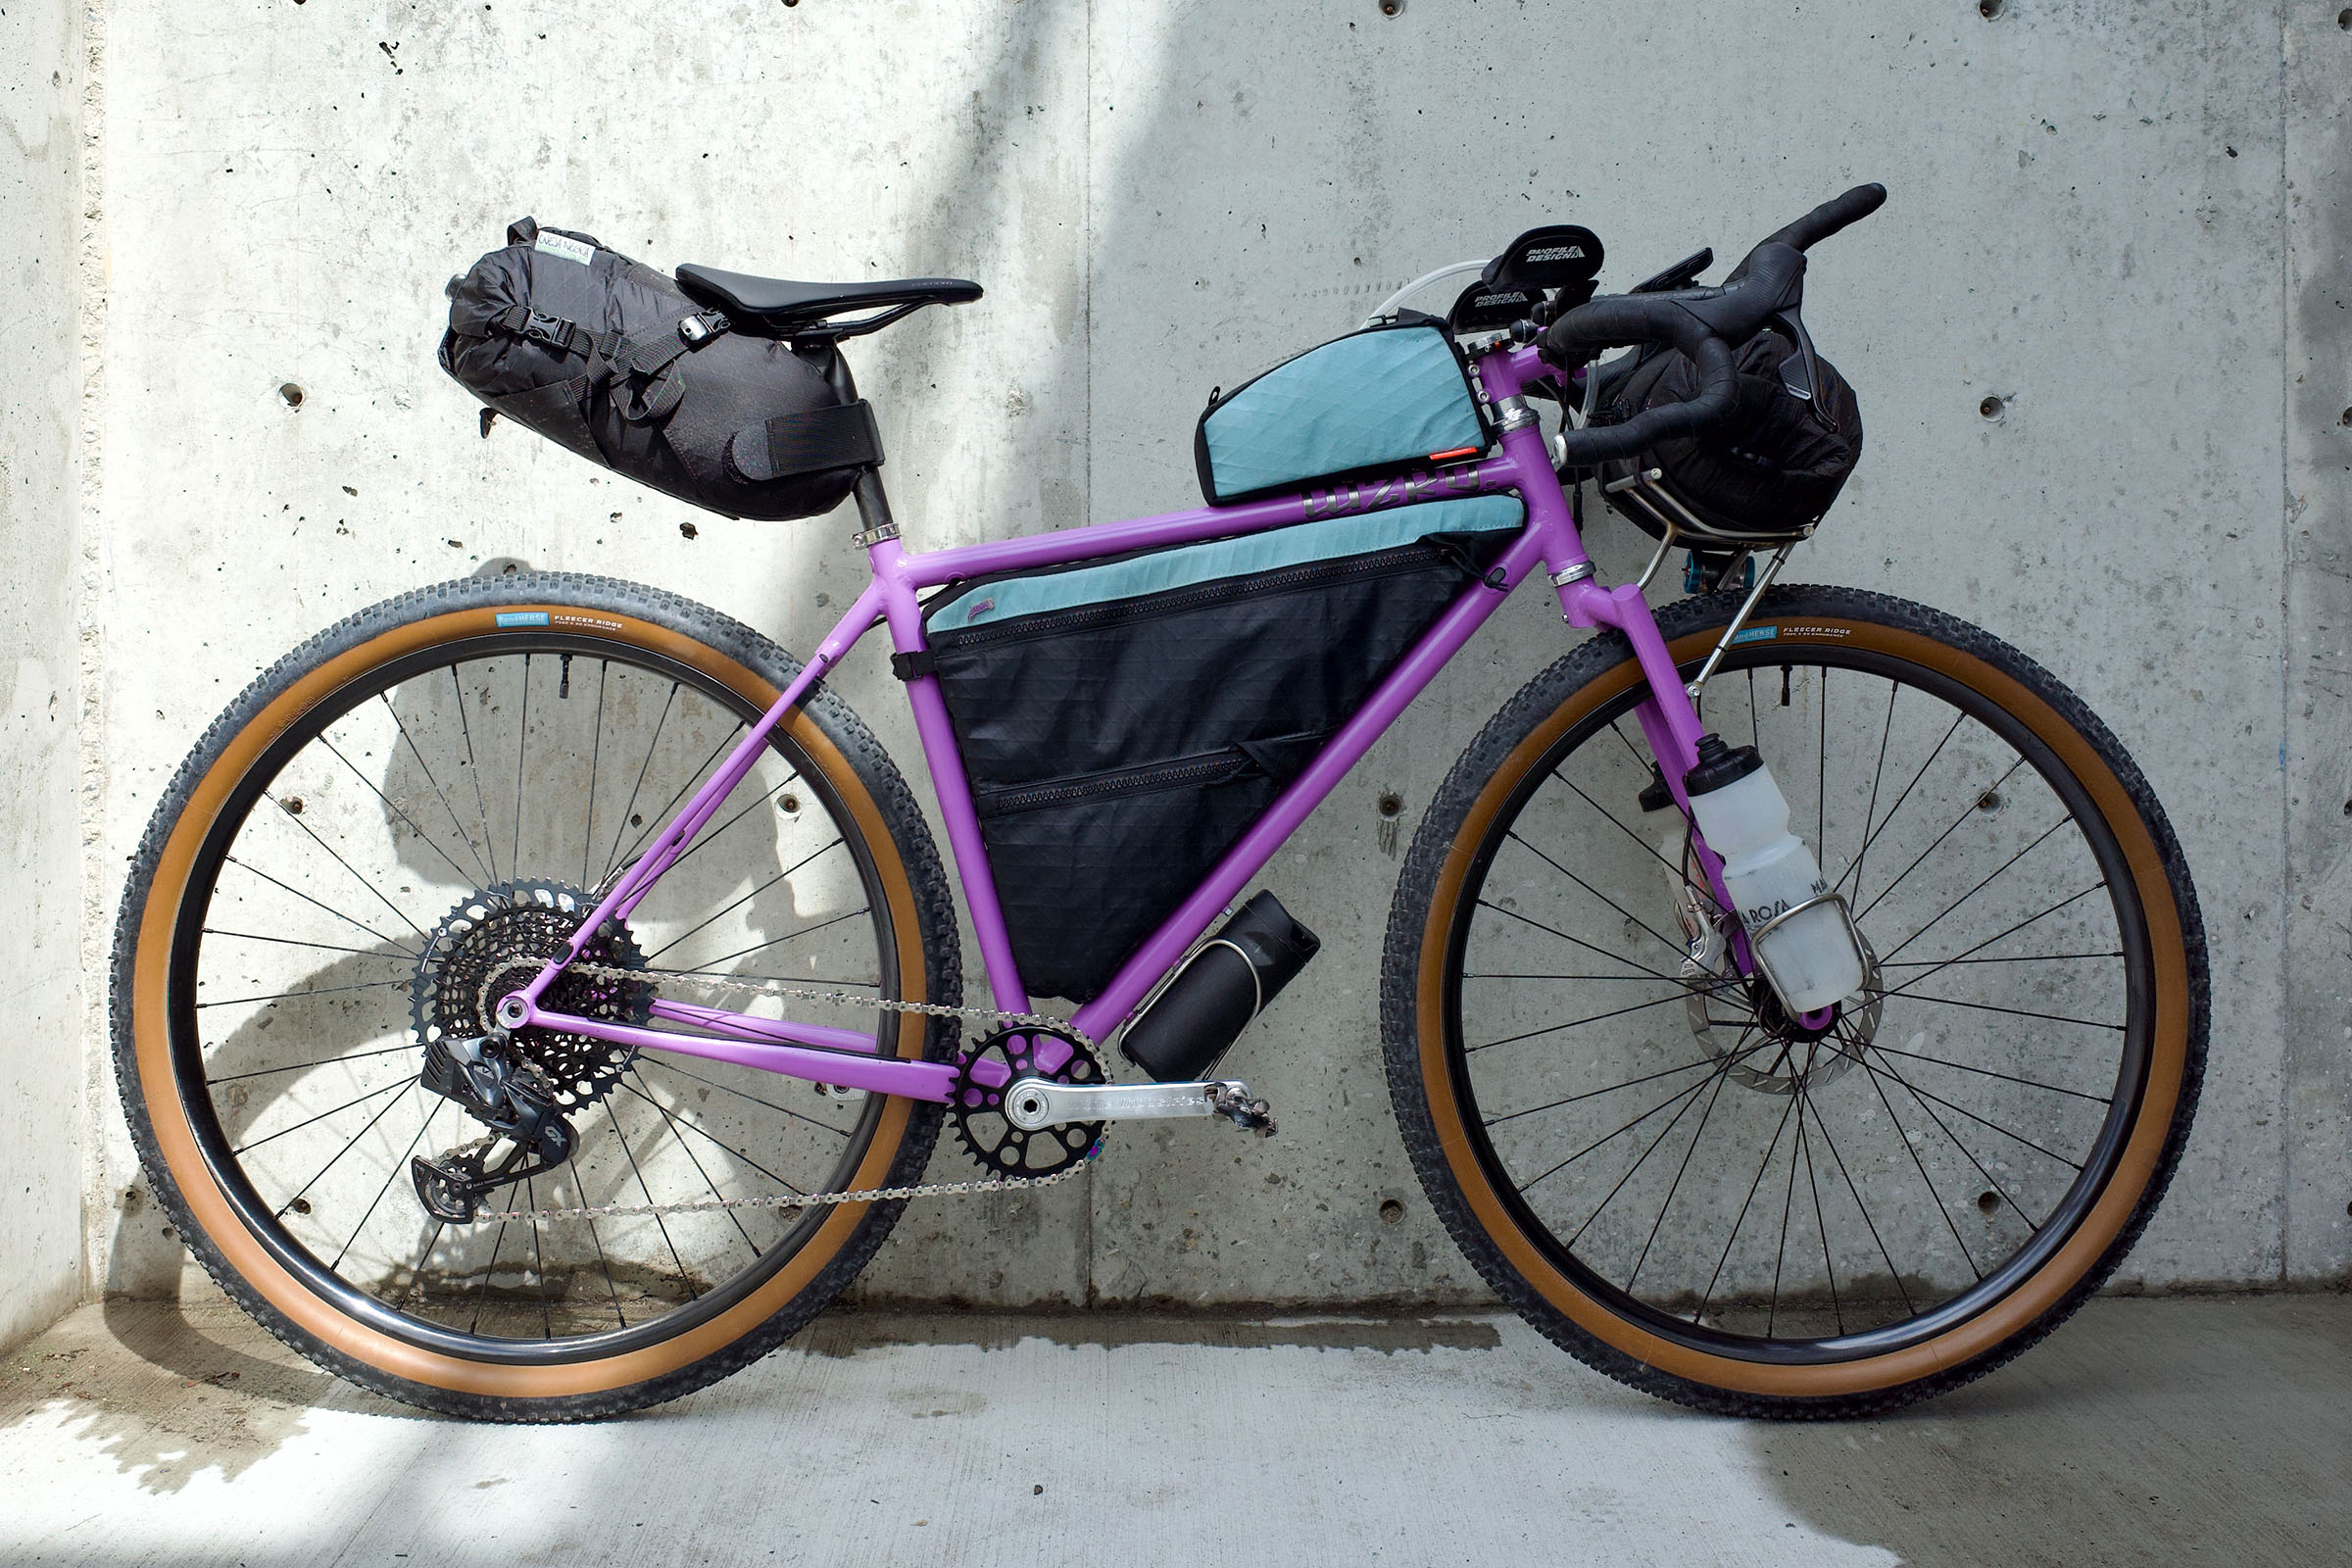 2. What features should I look for in a bike for bikepacking?